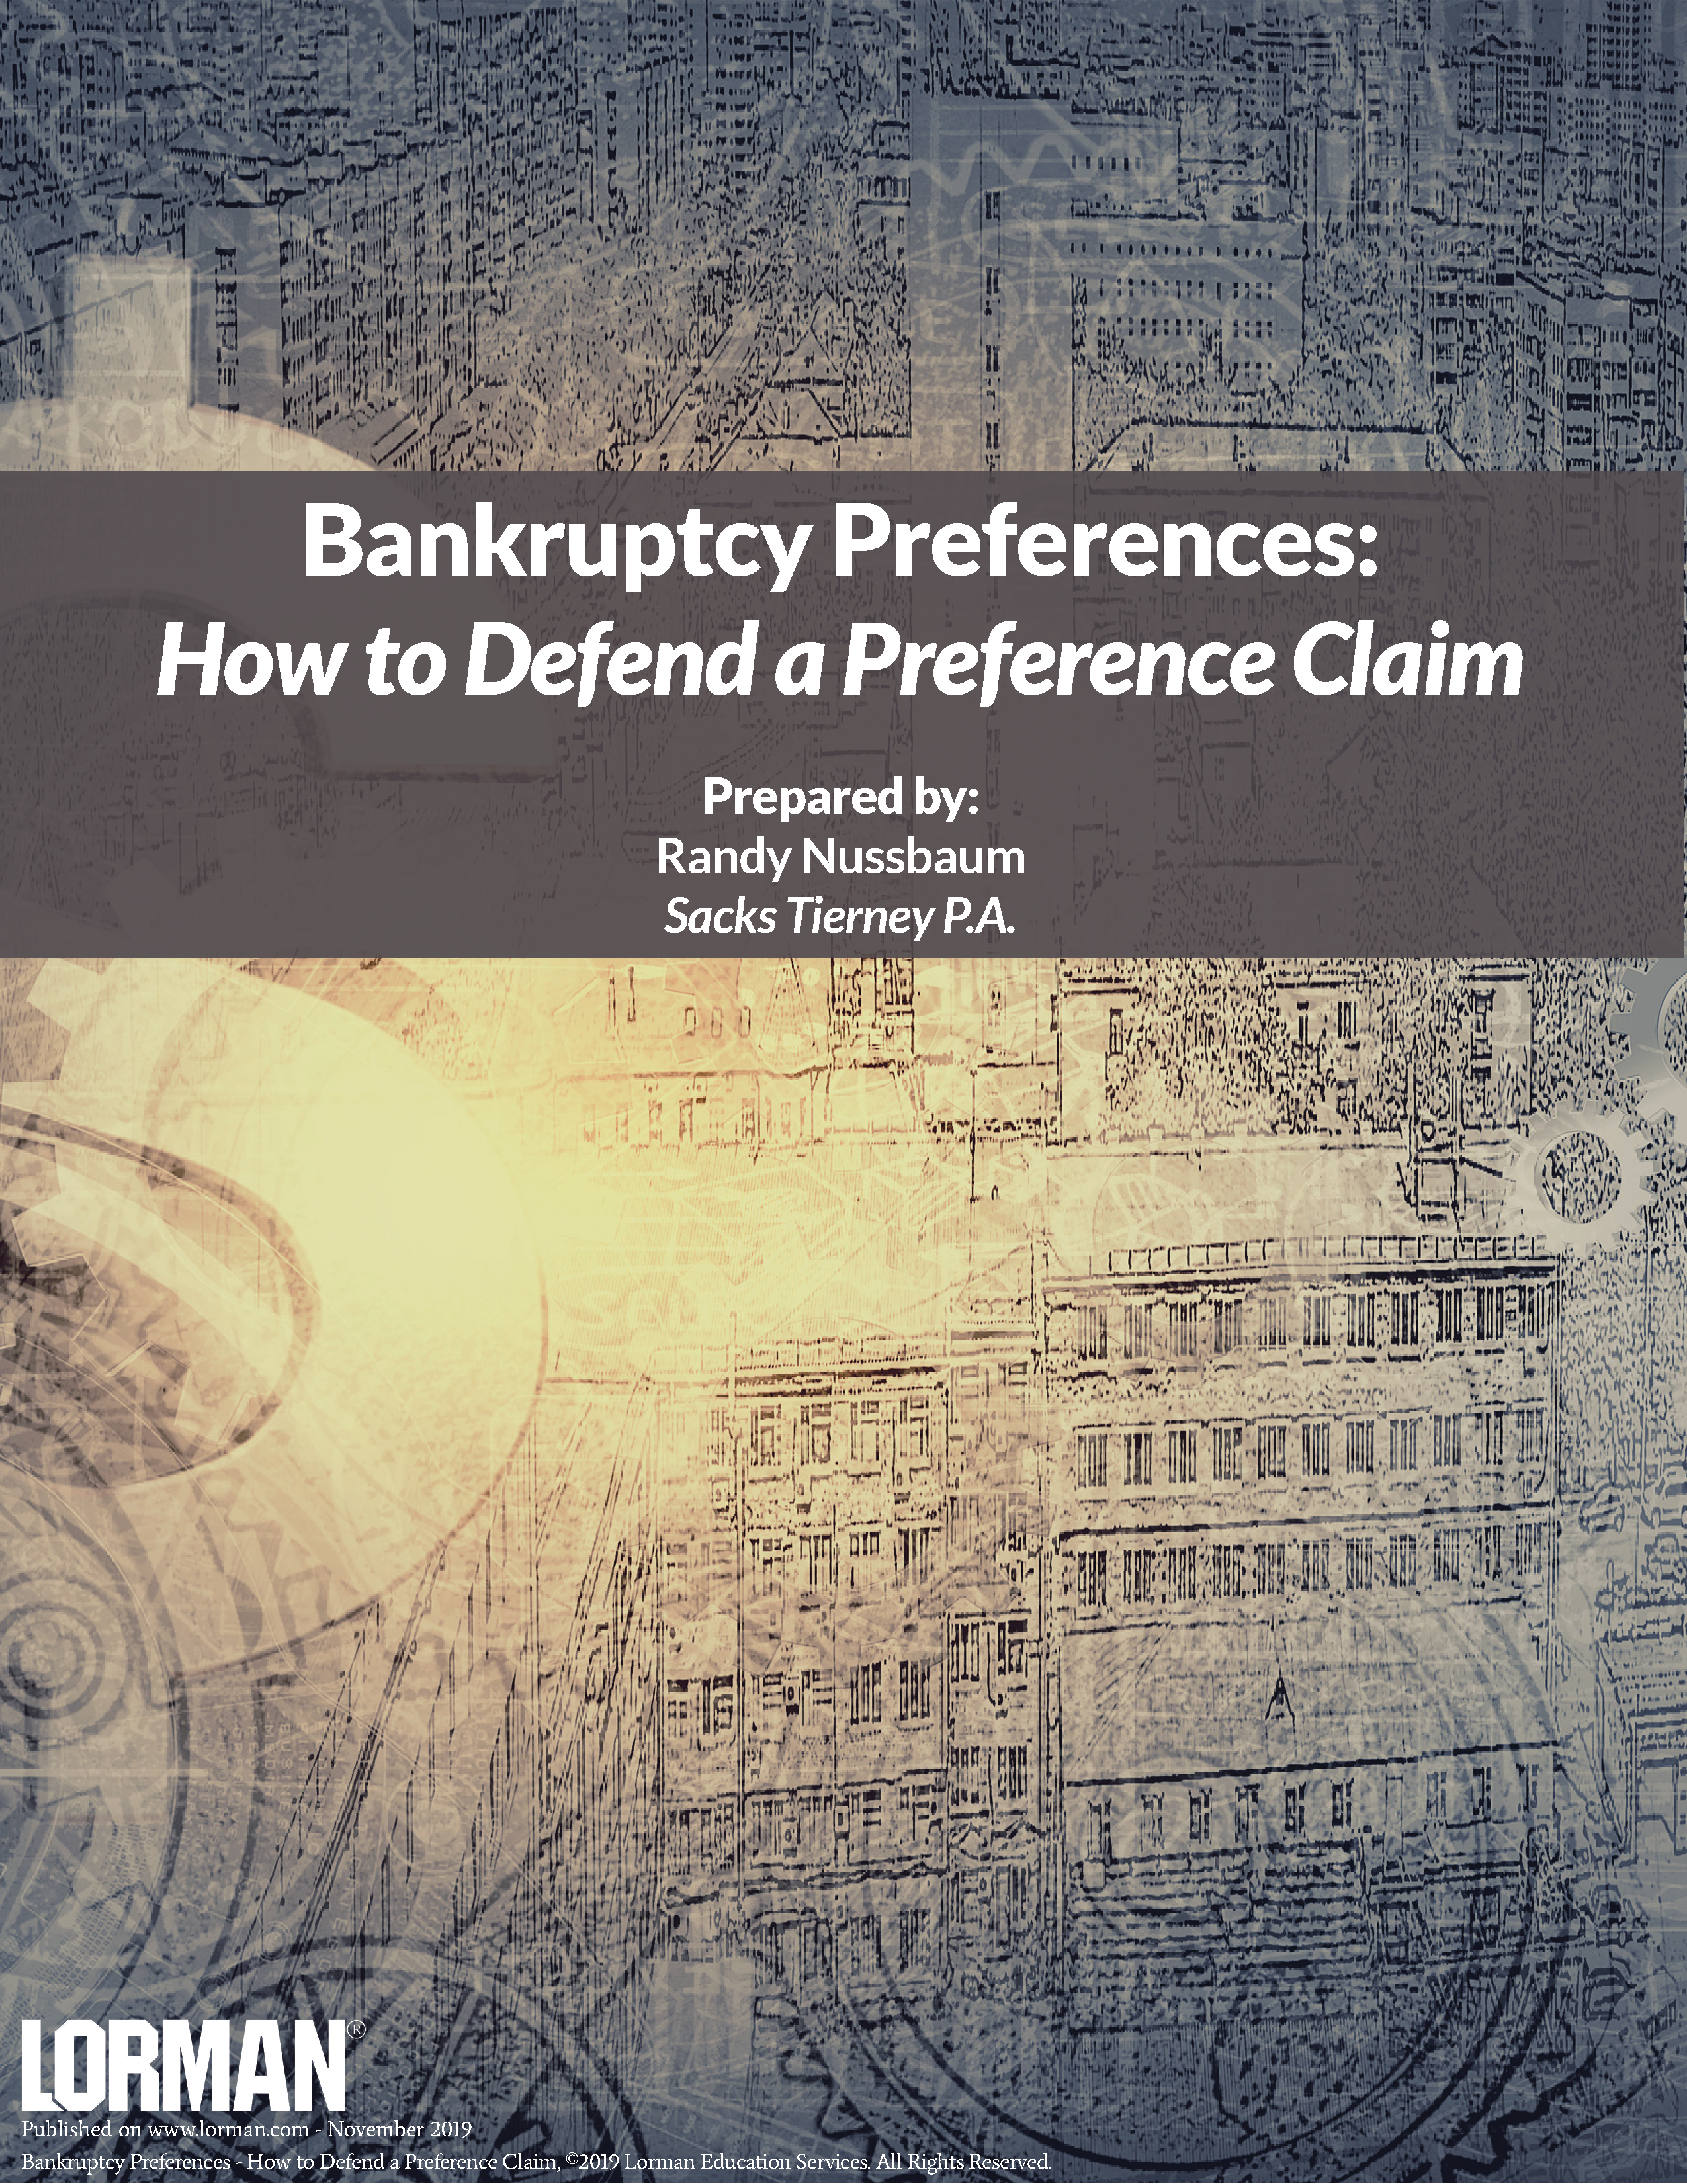 Bankruptcy Preferences: How to Defend a Preference Claim